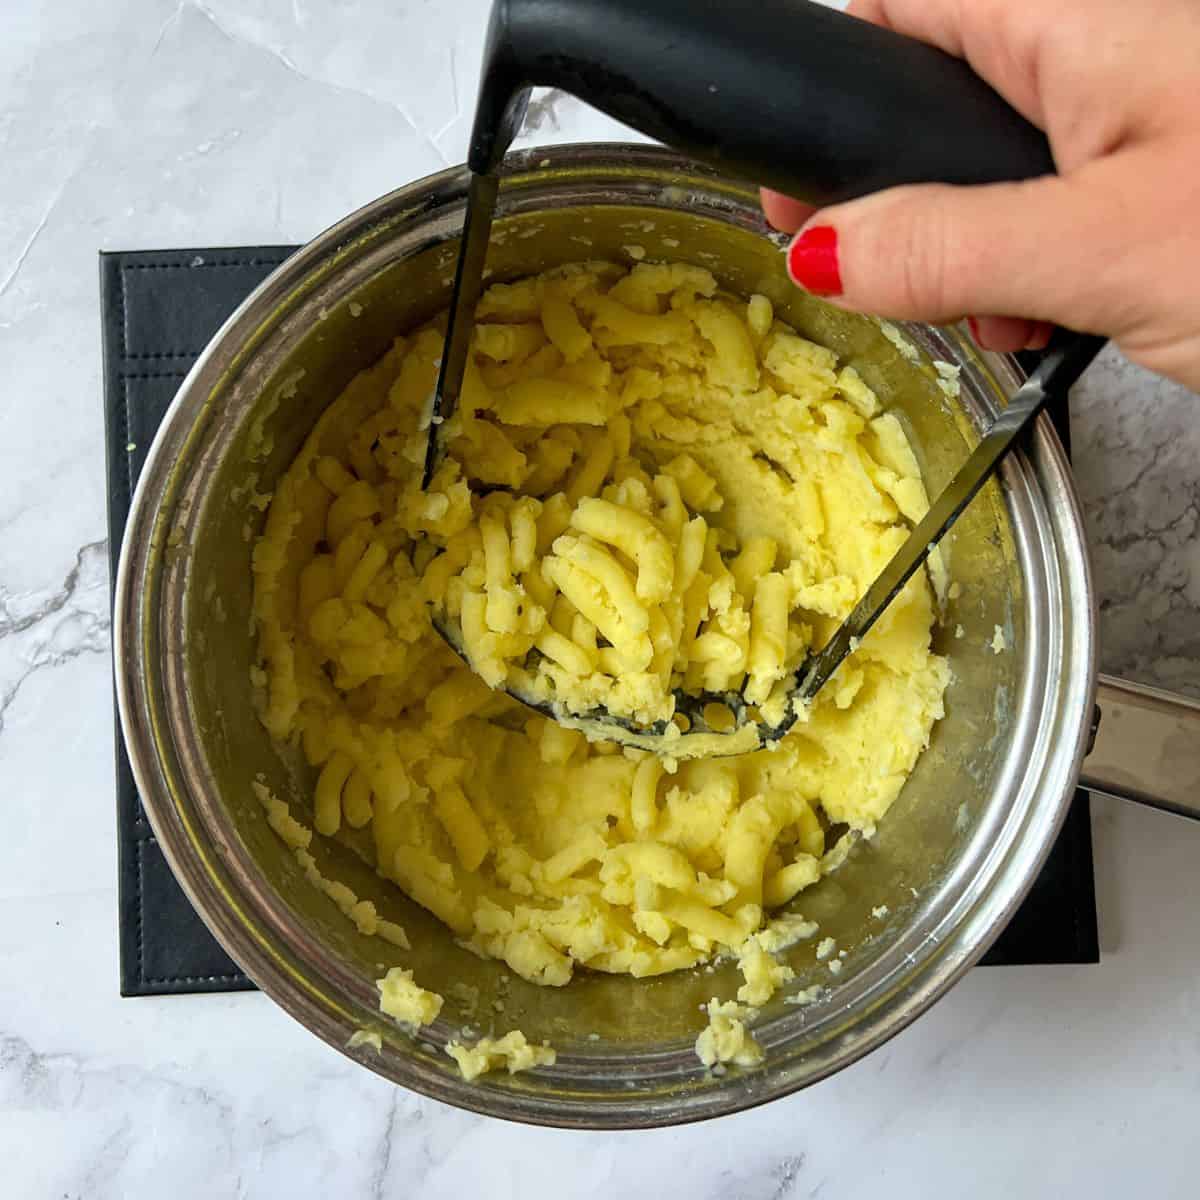 Potato in a saucepan being mashed with a potato masher.